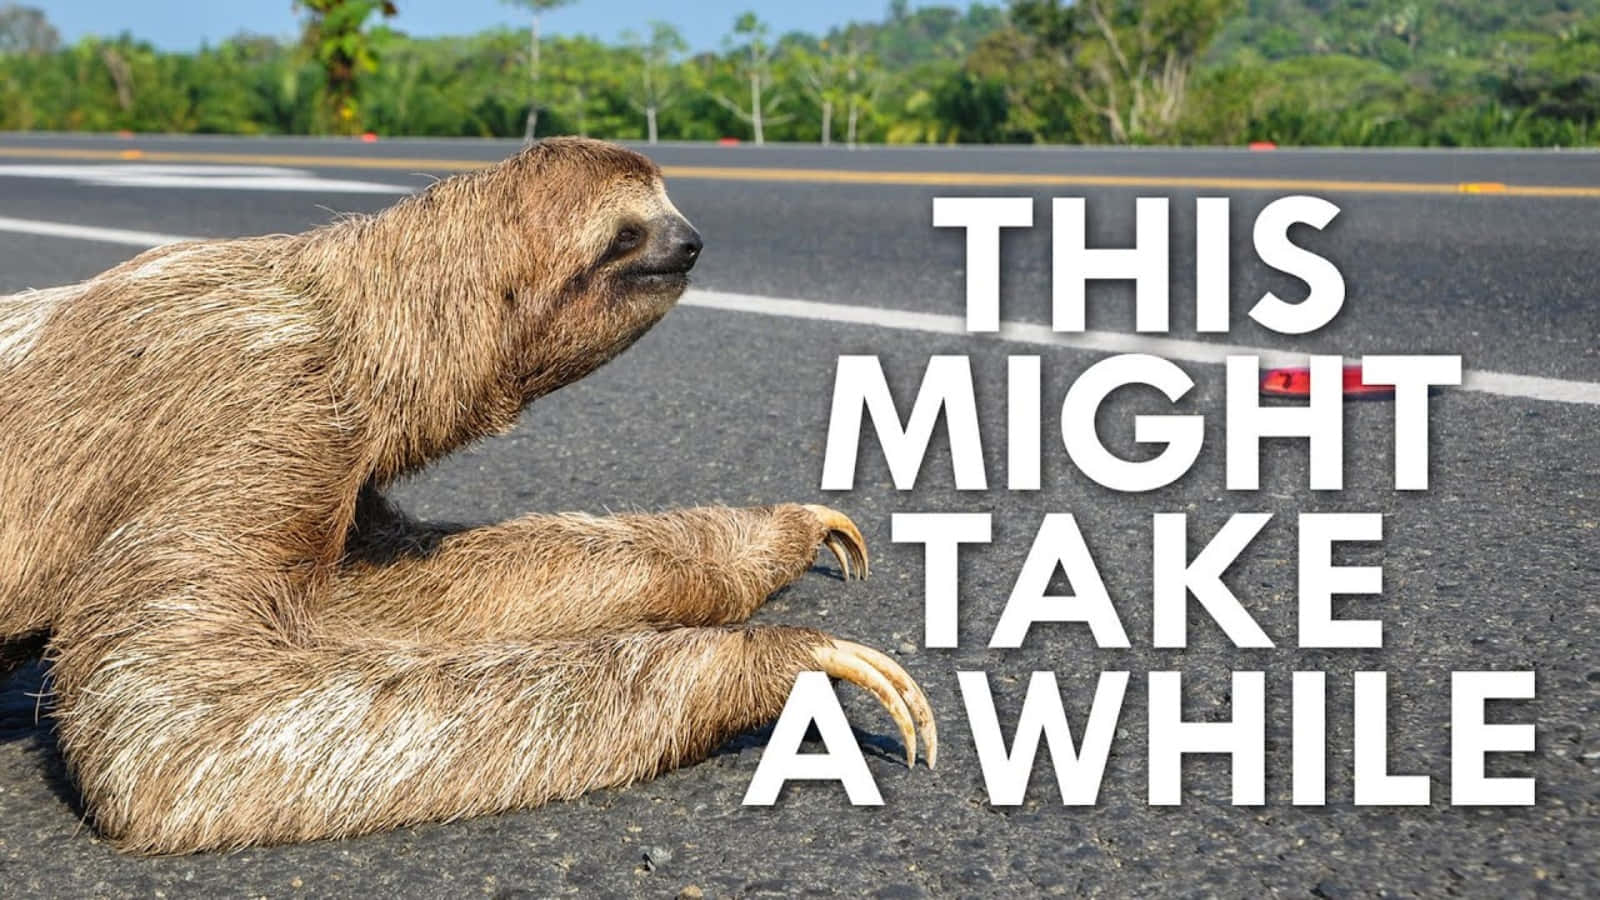 Funny Sloth Meme Picture Highway